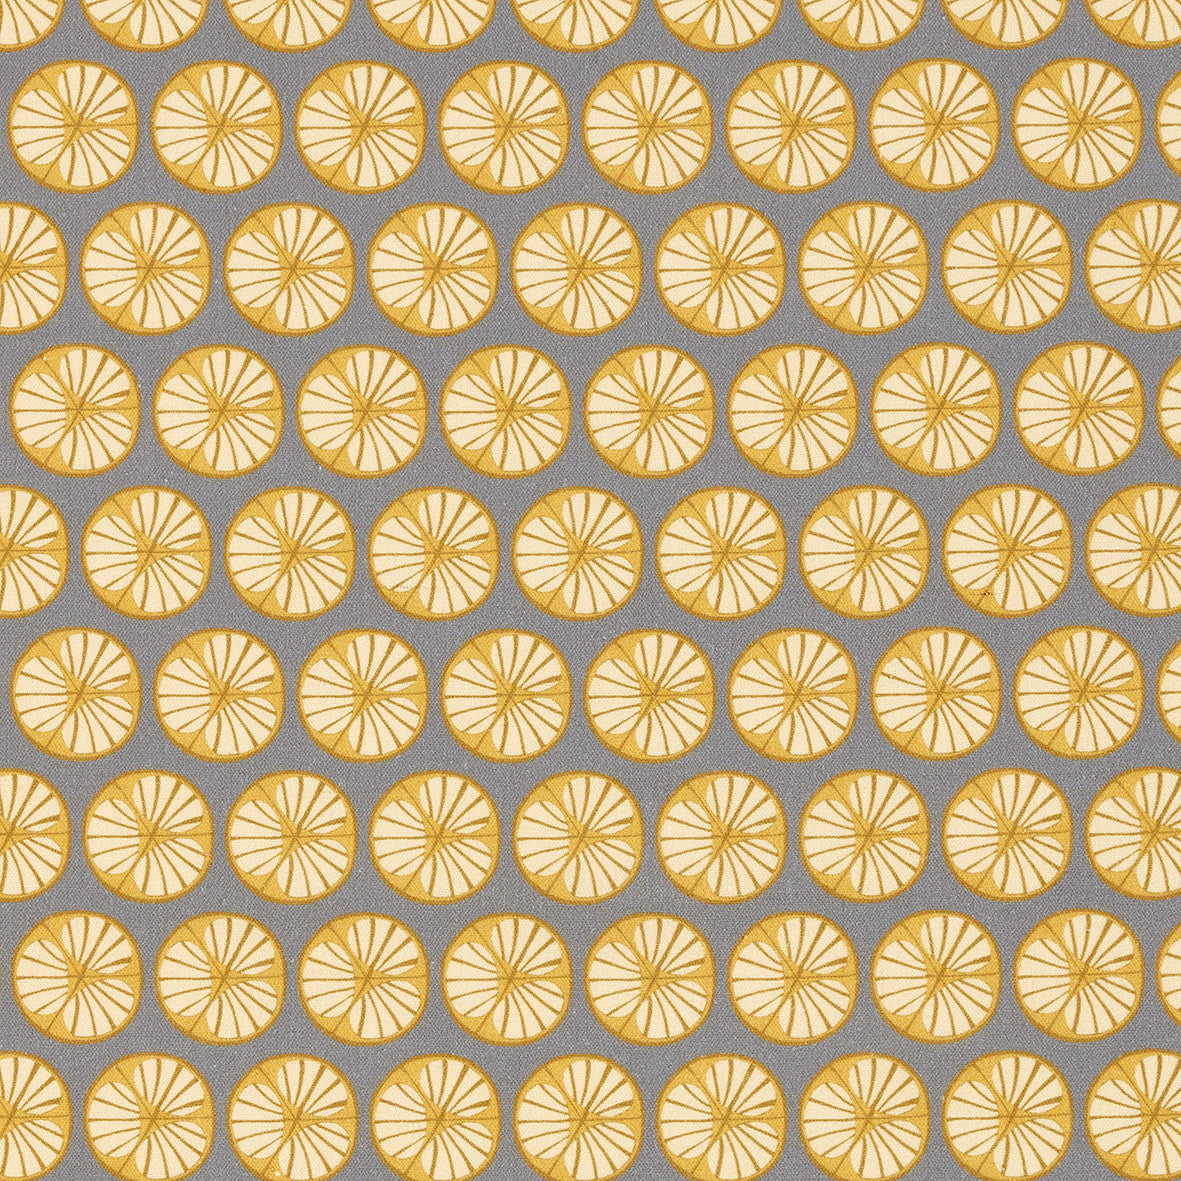 Graphic Cross Section of Fruit Pattern Printed Linen Cotton Canvas Fabric in Light Dove Grey and Saffron Yellow 